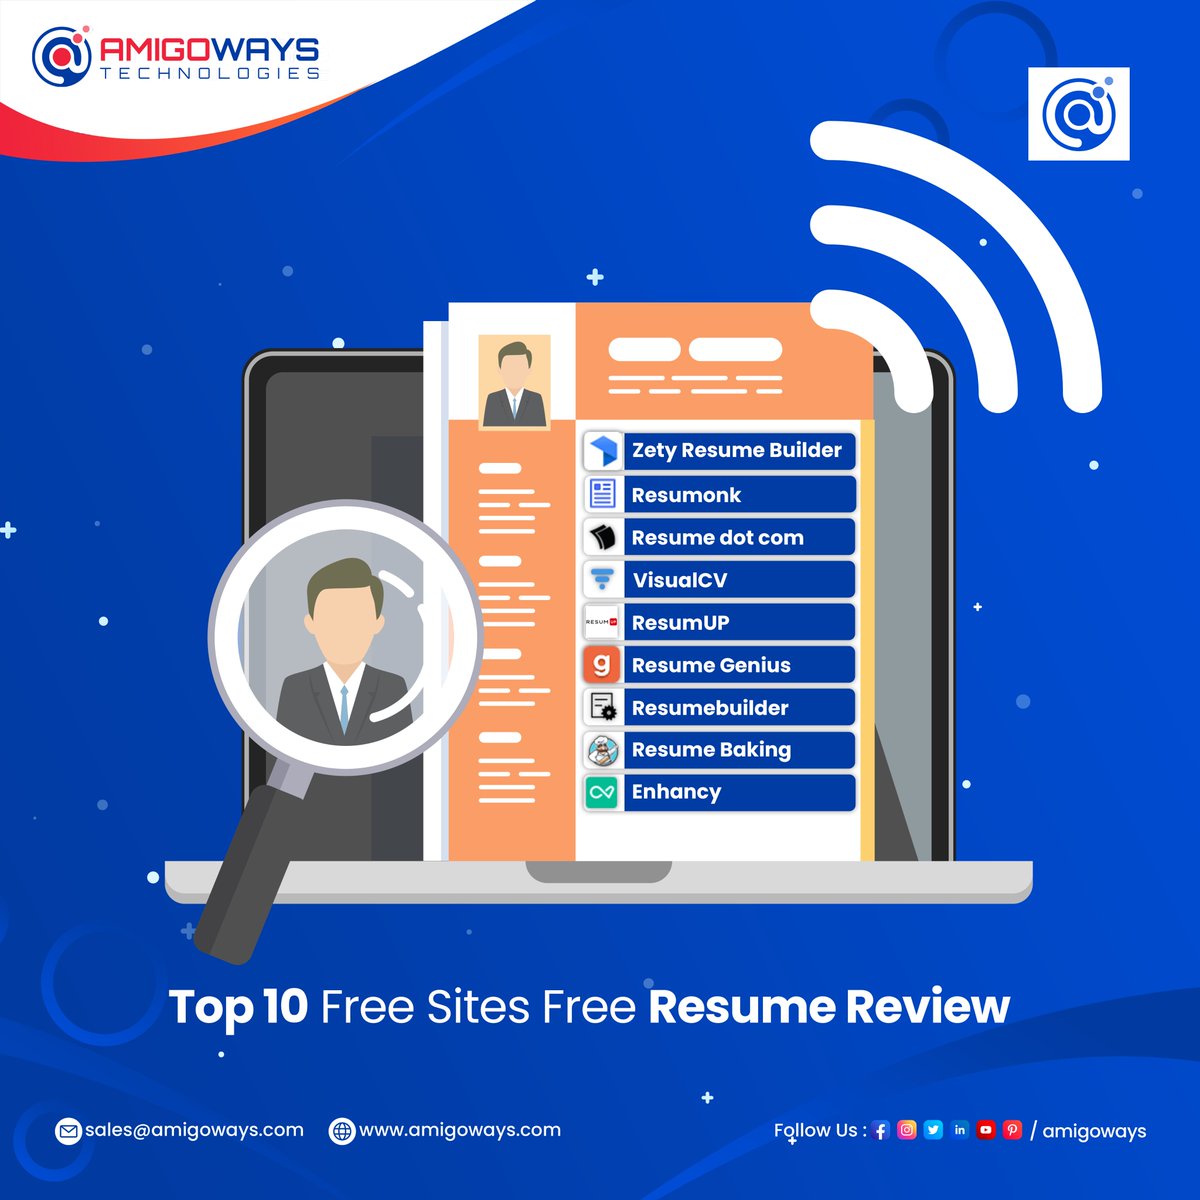 📝 Need your resume reviewed? Look no further! 

🚀 Simply upload your resume and get it verified for success

#resumereview #verifiedresume #jobseekers #careeradvancement #professionaldevelopment #jobsearchtips #jobapplication #jobready #careersuccess #resumetips #letsconnect